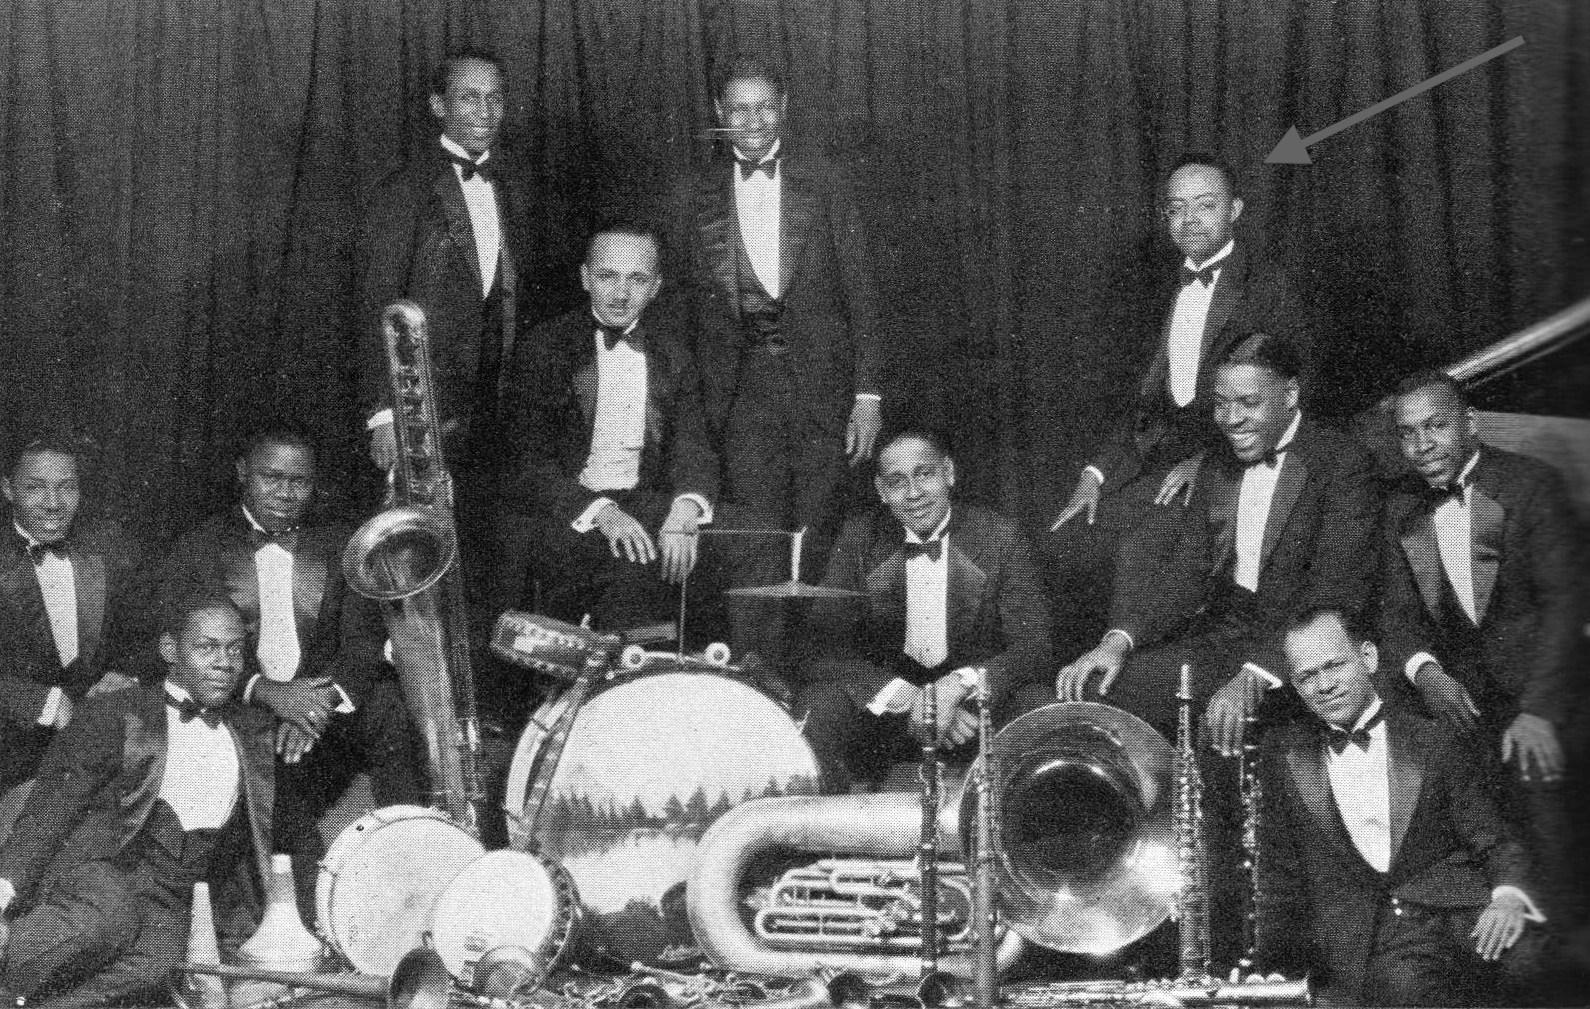 HendersonOrchestra per Old Time Blues website